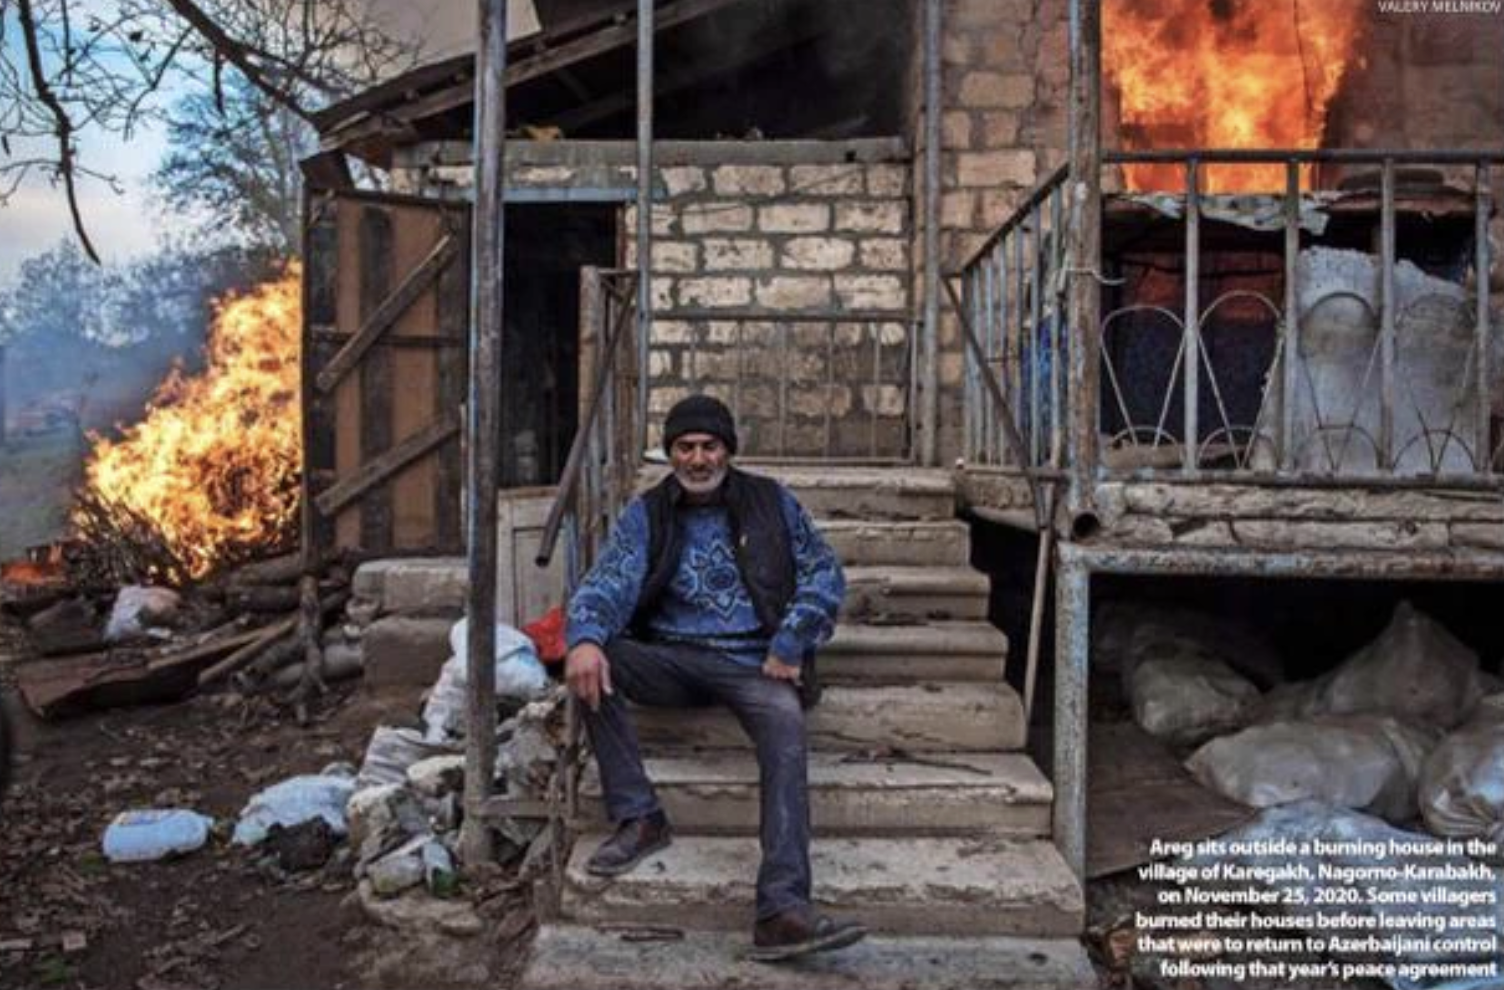 AND IN OTHER NEWS: 200+ Days of Blockade In Karabakh